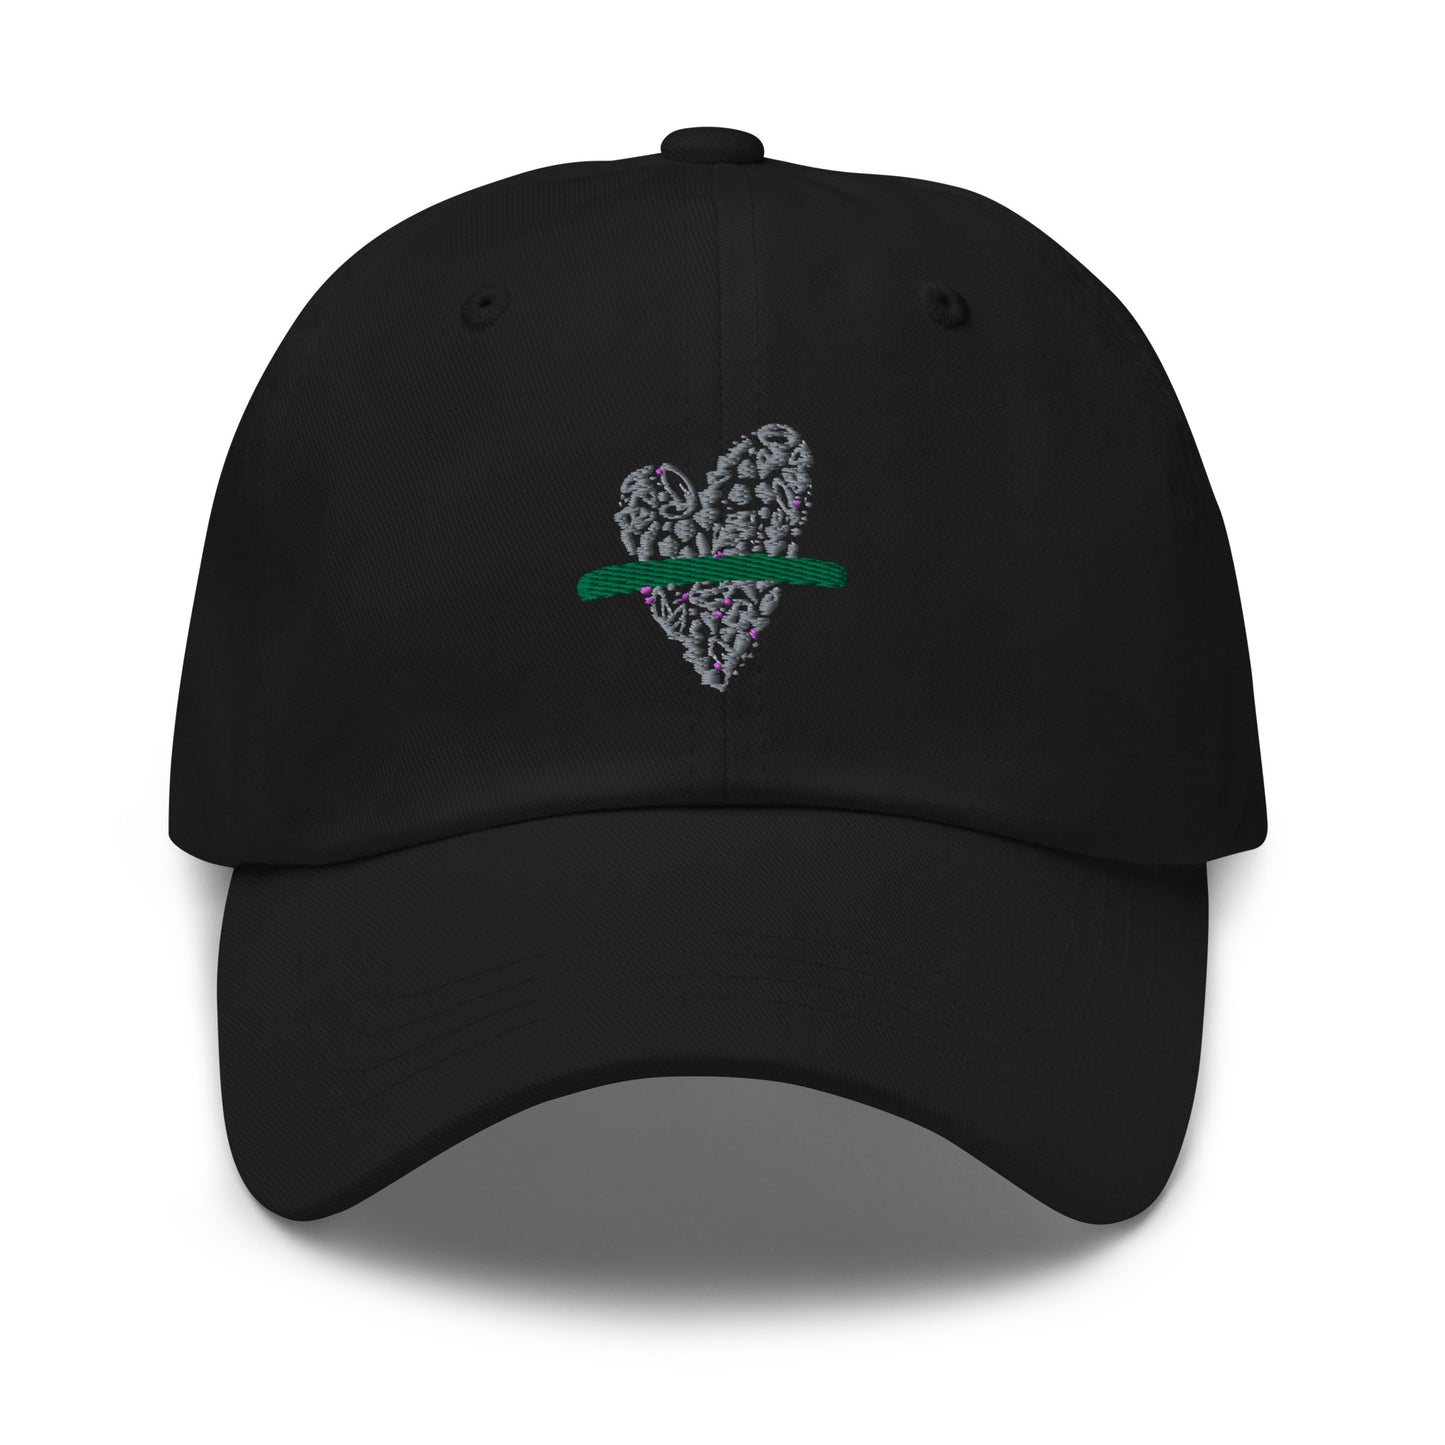 In My Heart Hat - Military